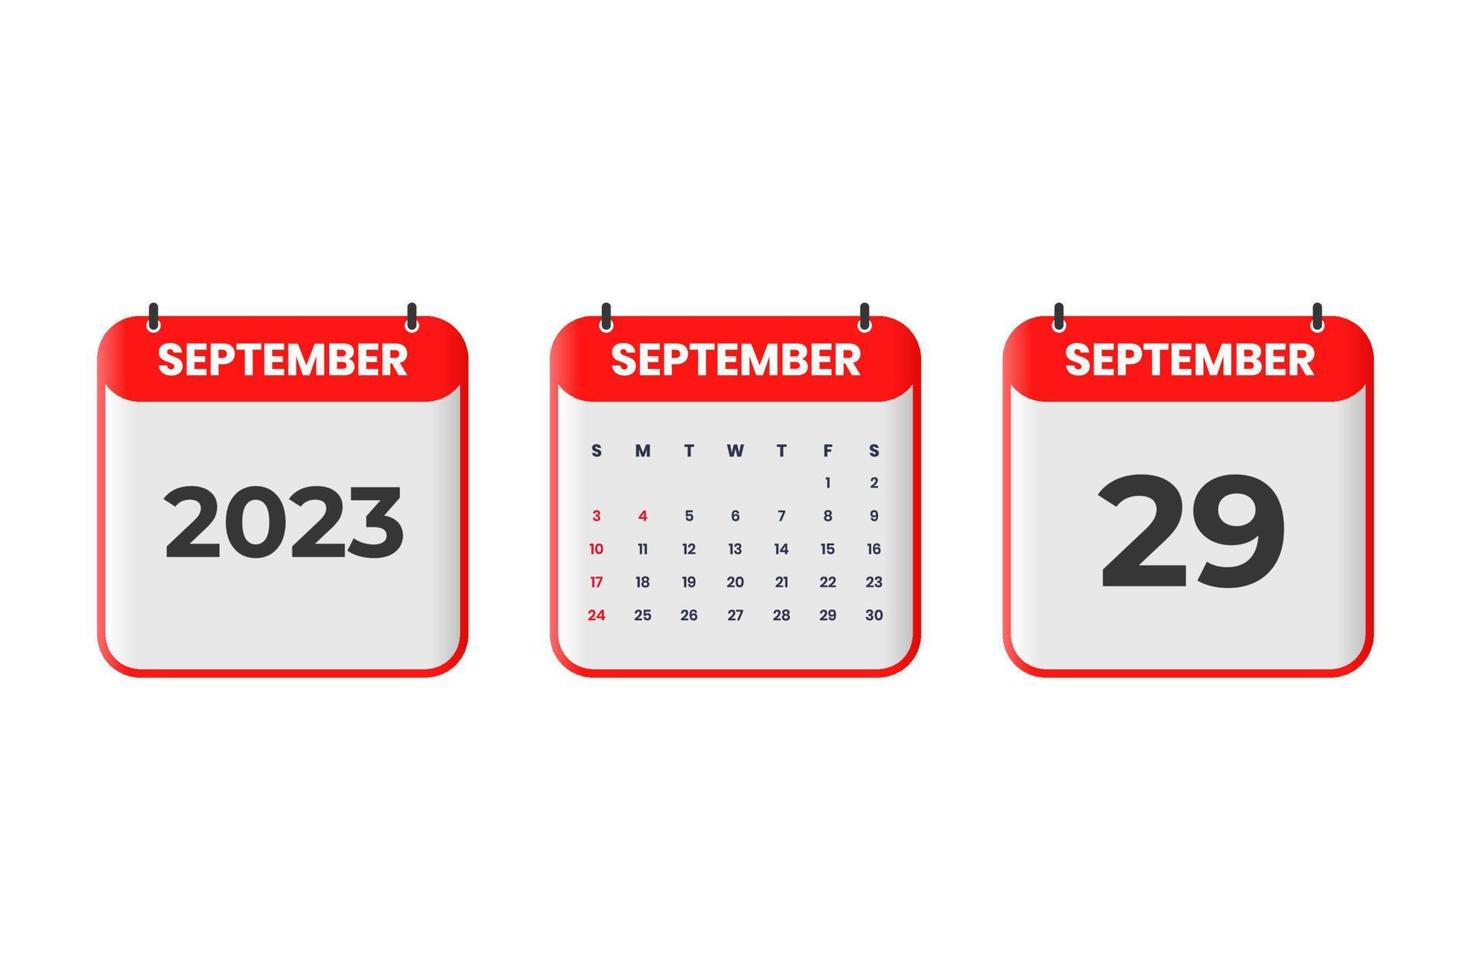 September 2023 calendar design. 29th September 2023 calendar icon for schedule, appointment, important date concept vector